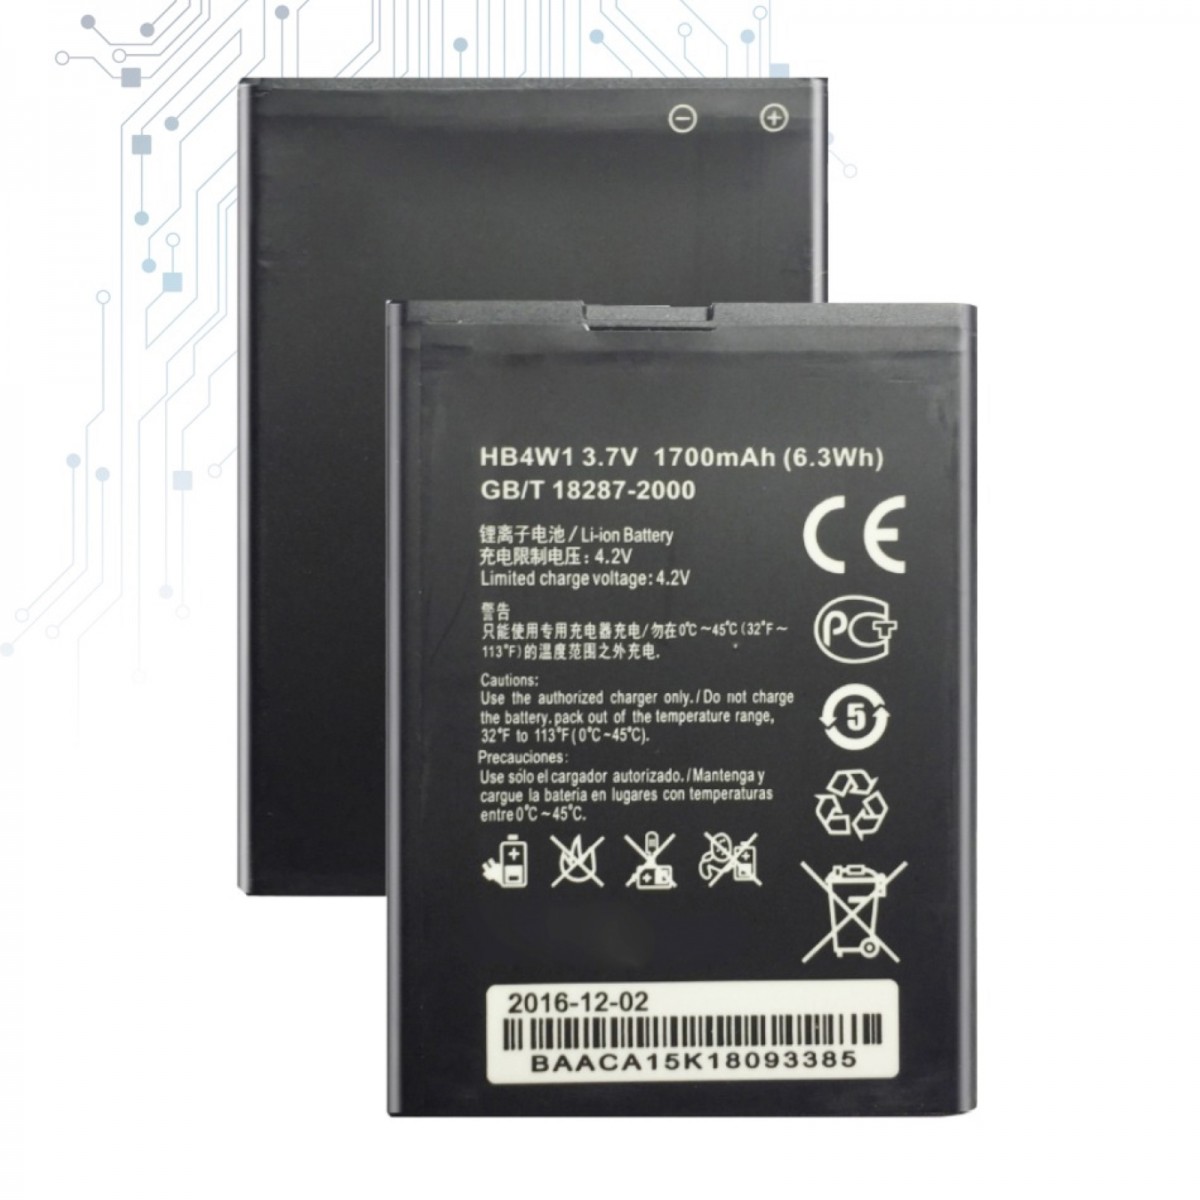 For Huawei Ascend G510 Part Number: HB4W1